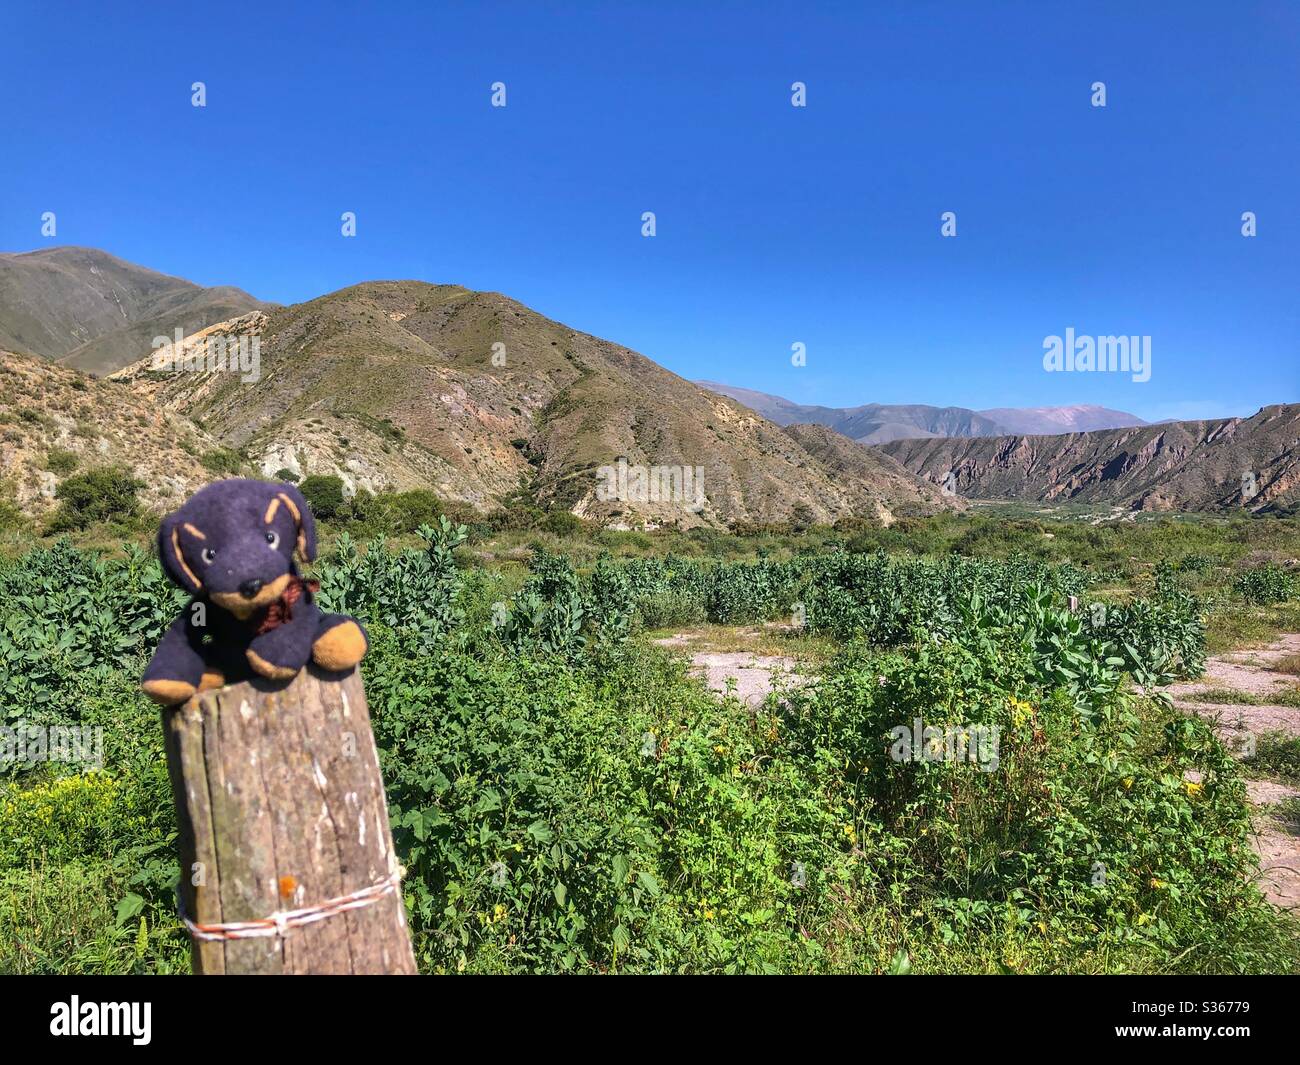 The arid landscape of Northern Argentina (and a little black stuffed dog). Stock Photo